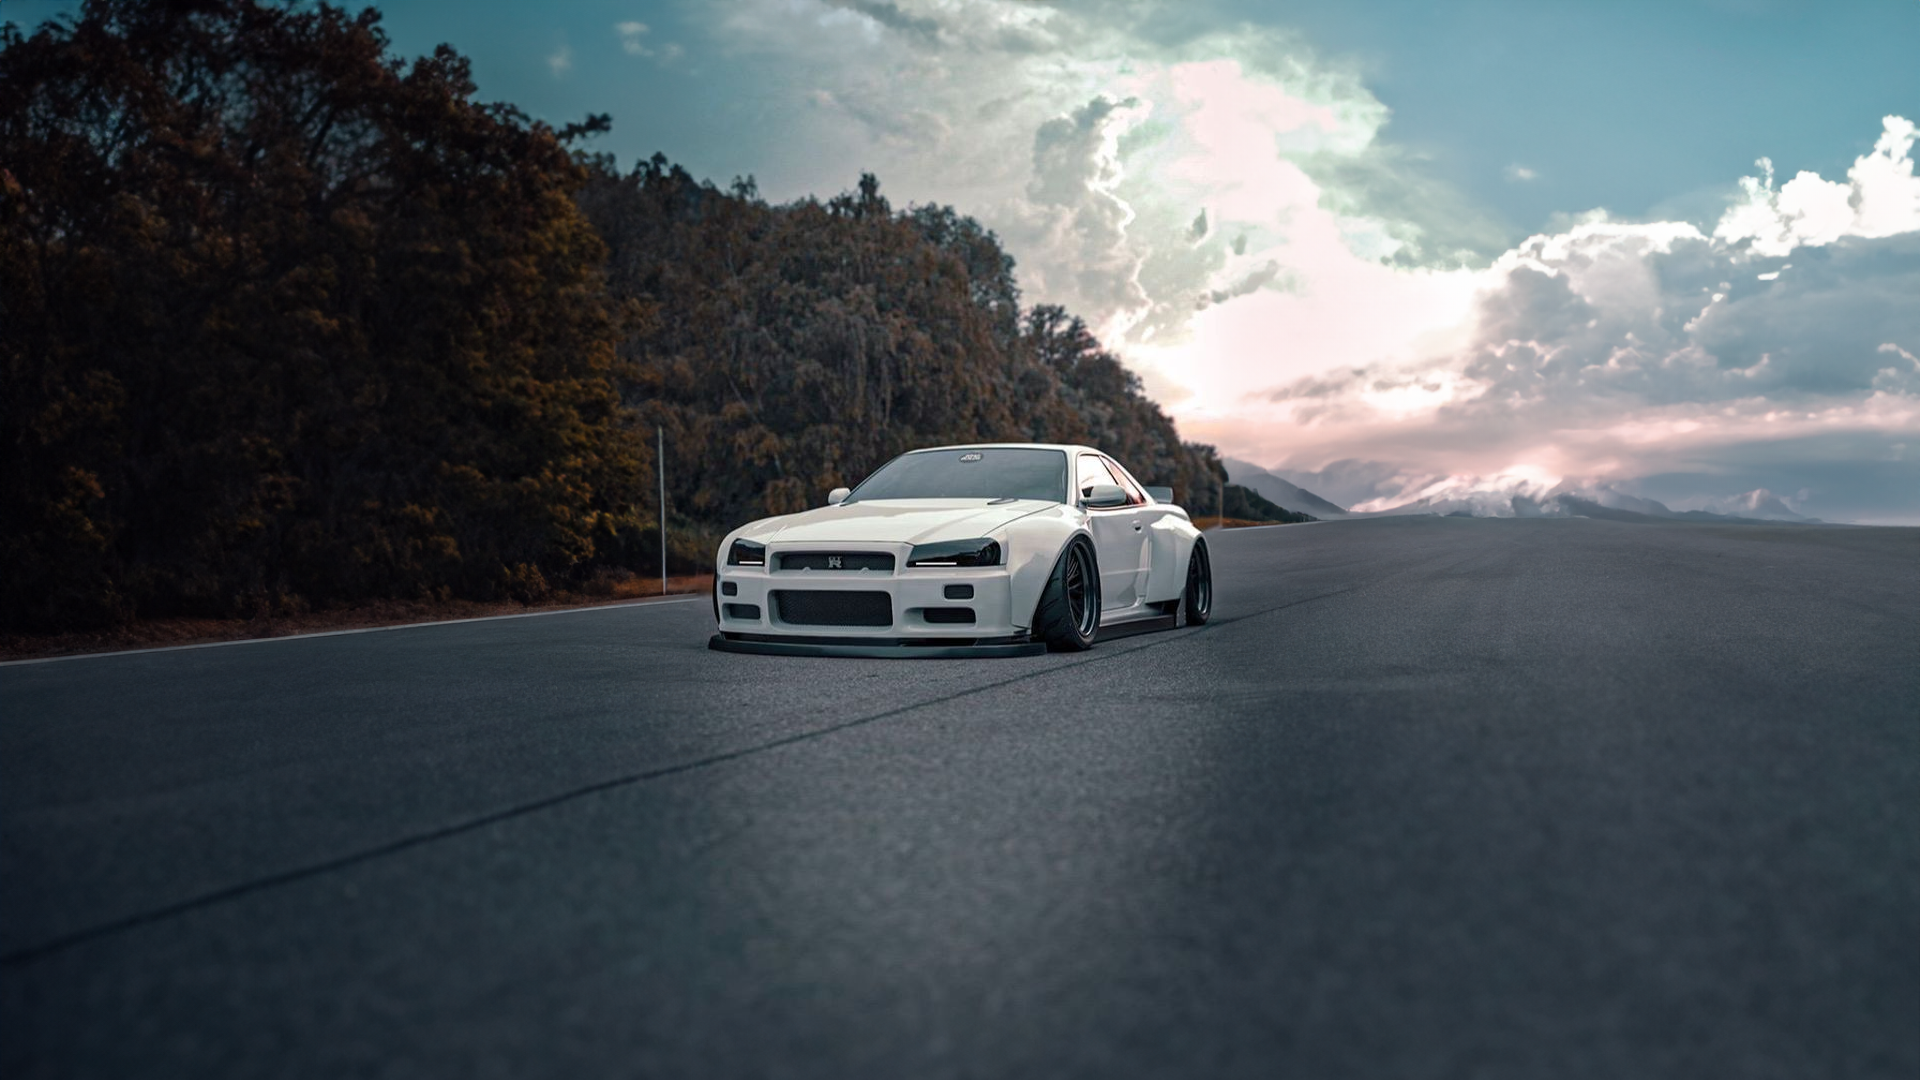 Nissan GT R Road Mountains Trees Car Front Angle View Sky Clouds 1920x1080